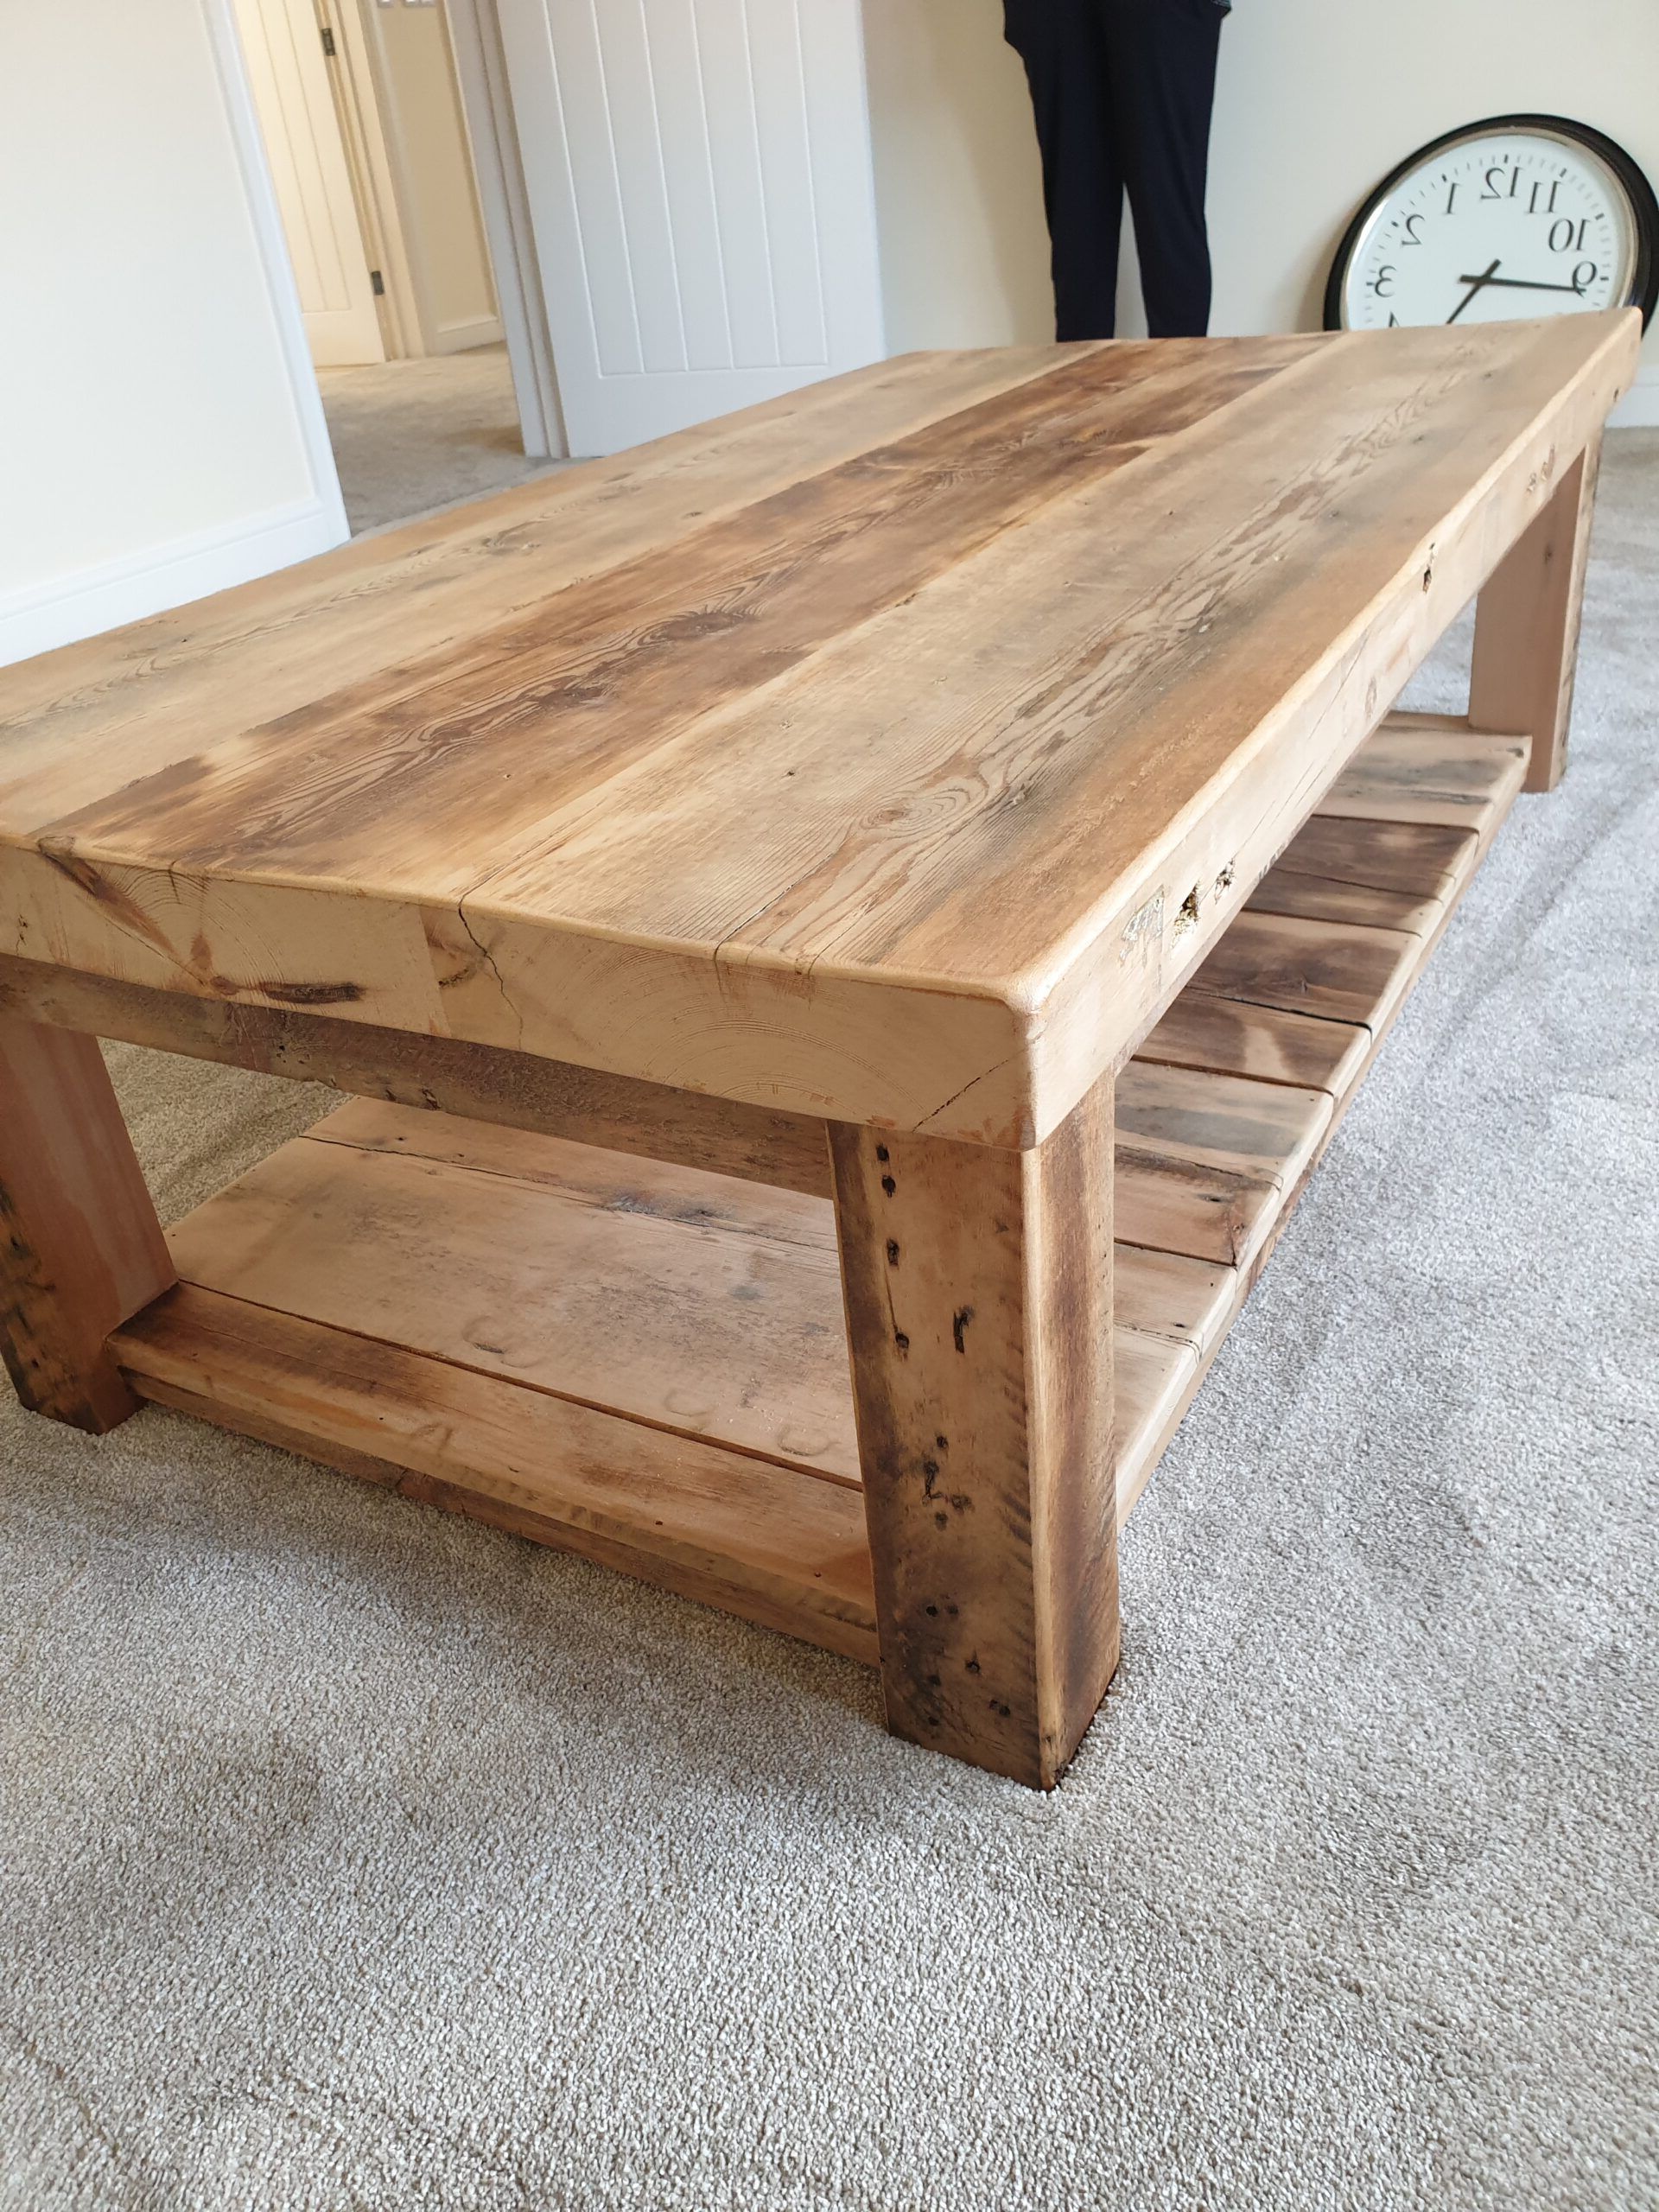 Rustic Coffee Tables Intended For Most Up To Date Buy Rustic Wood Coffee Table Made From Reclaimed Timber (Photo 10 of 10)